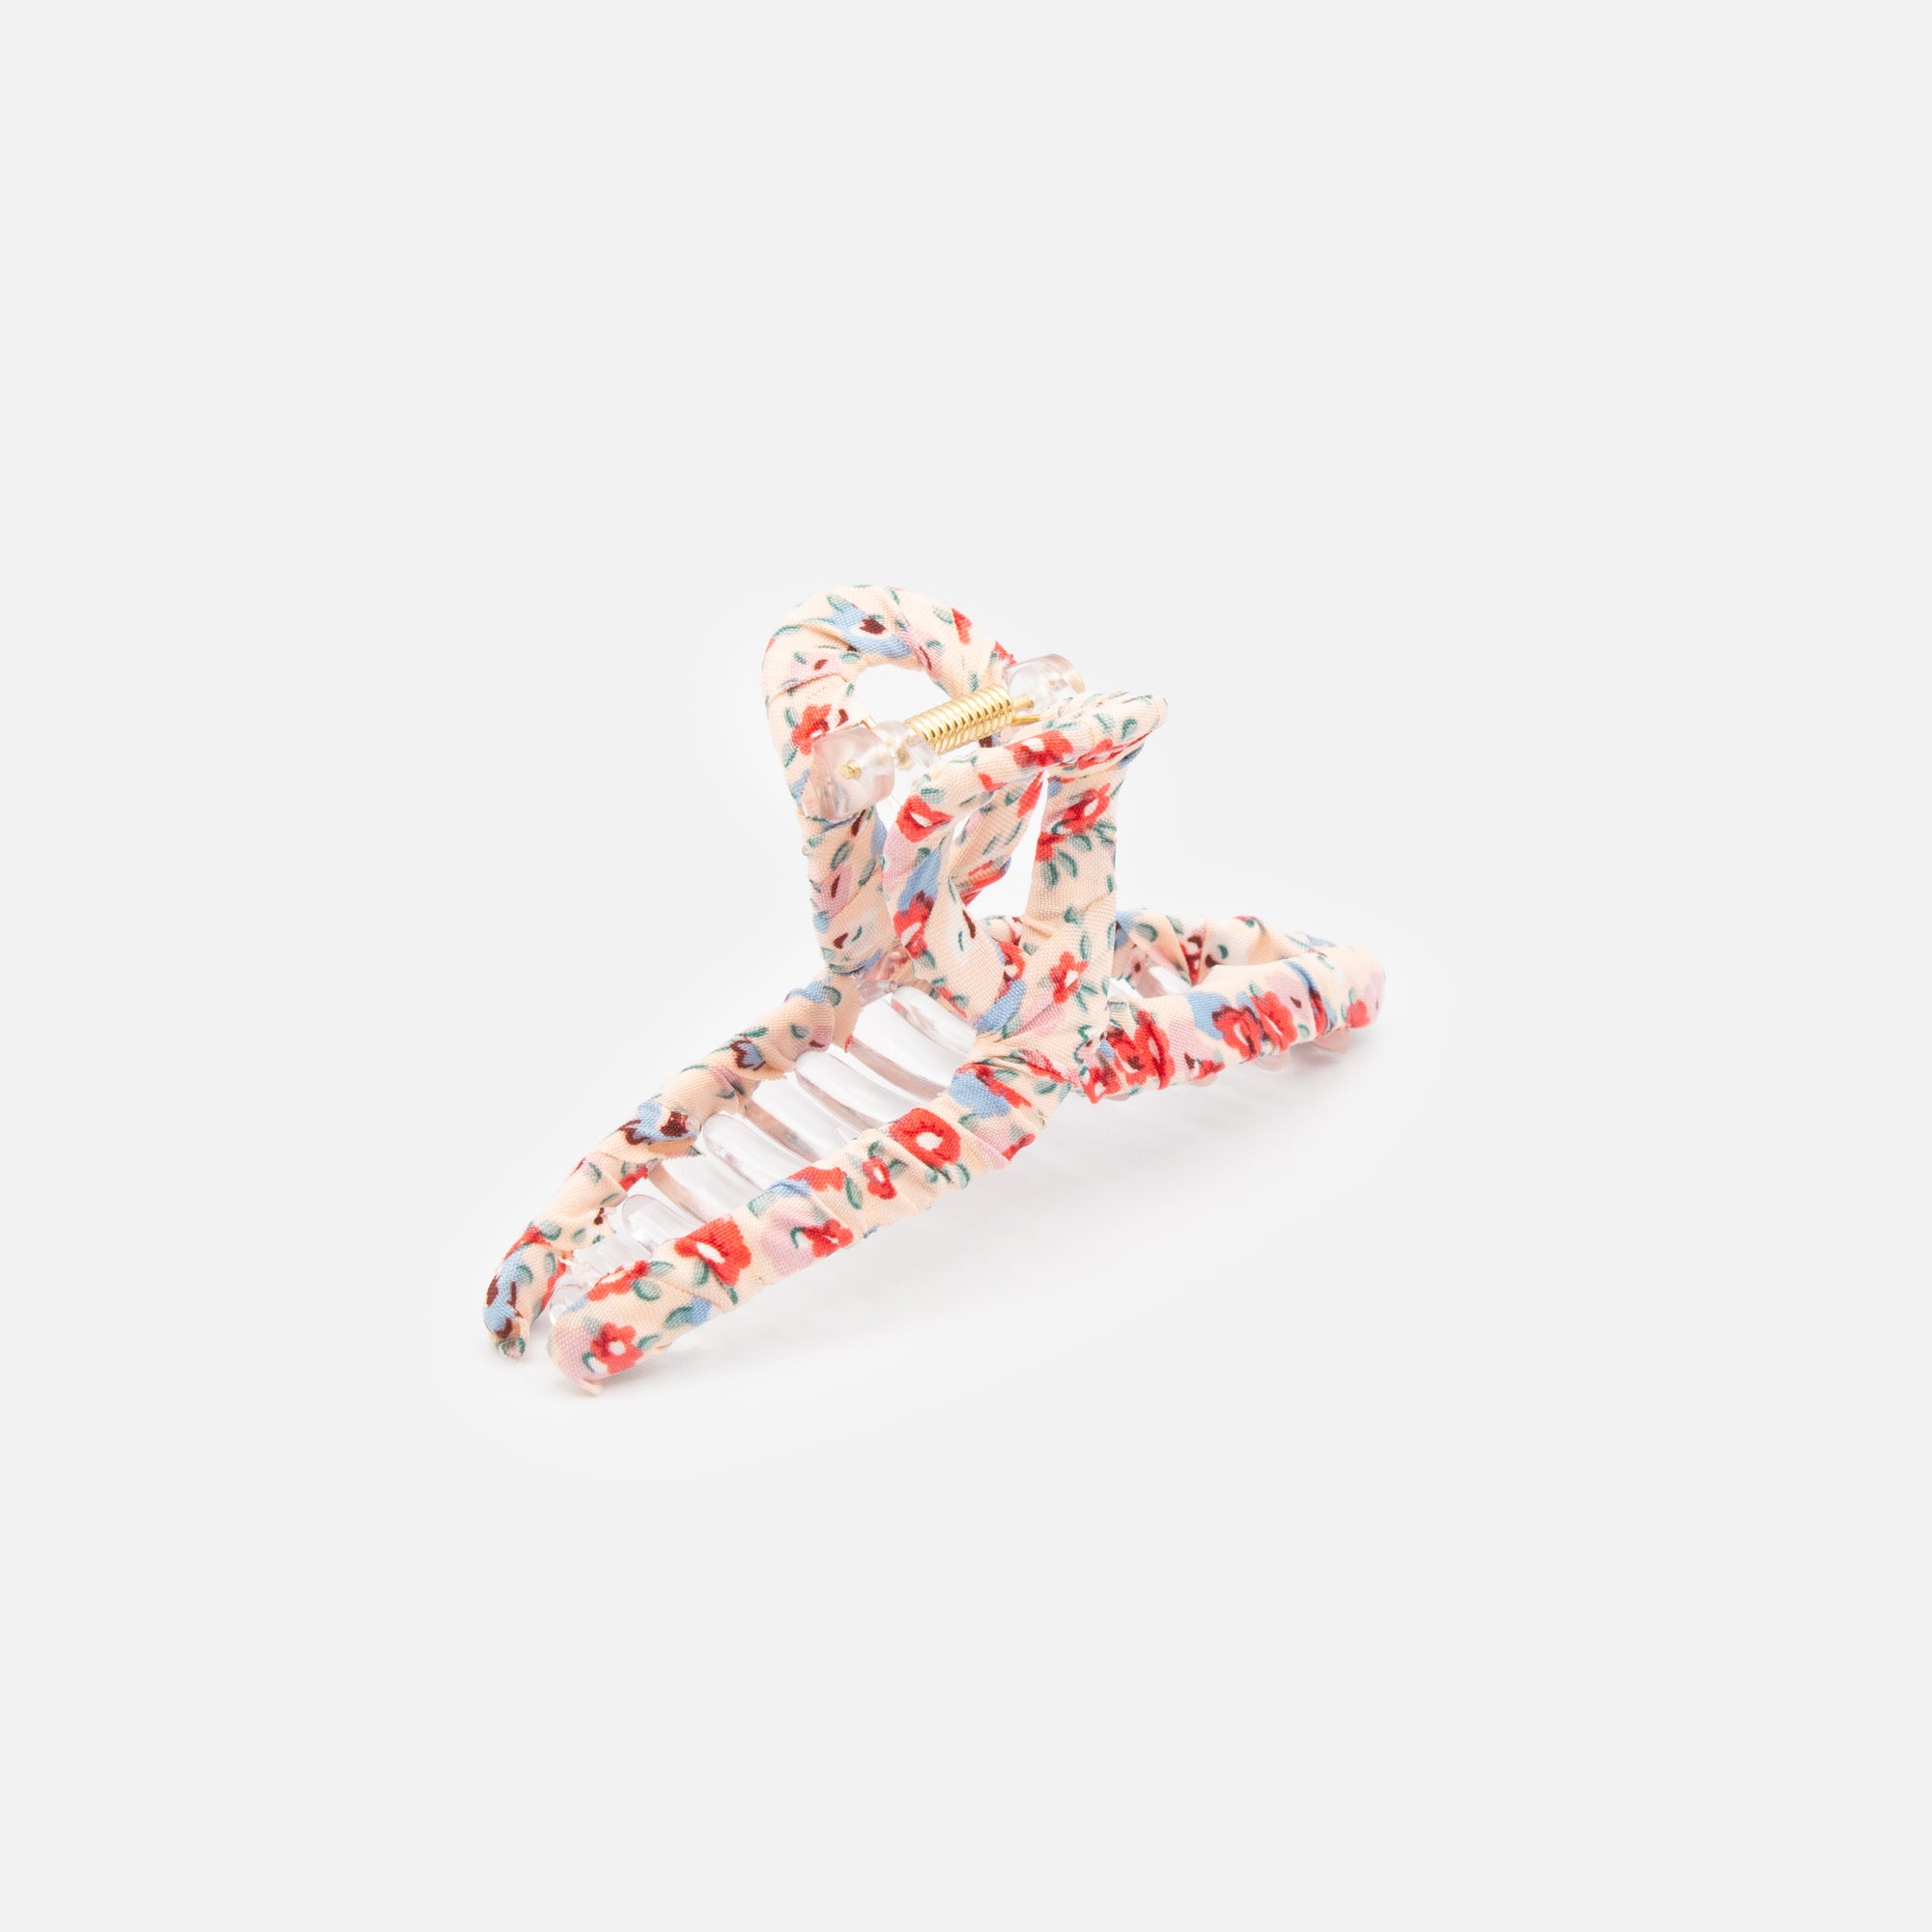 Flowered pale pink fabric hair clip